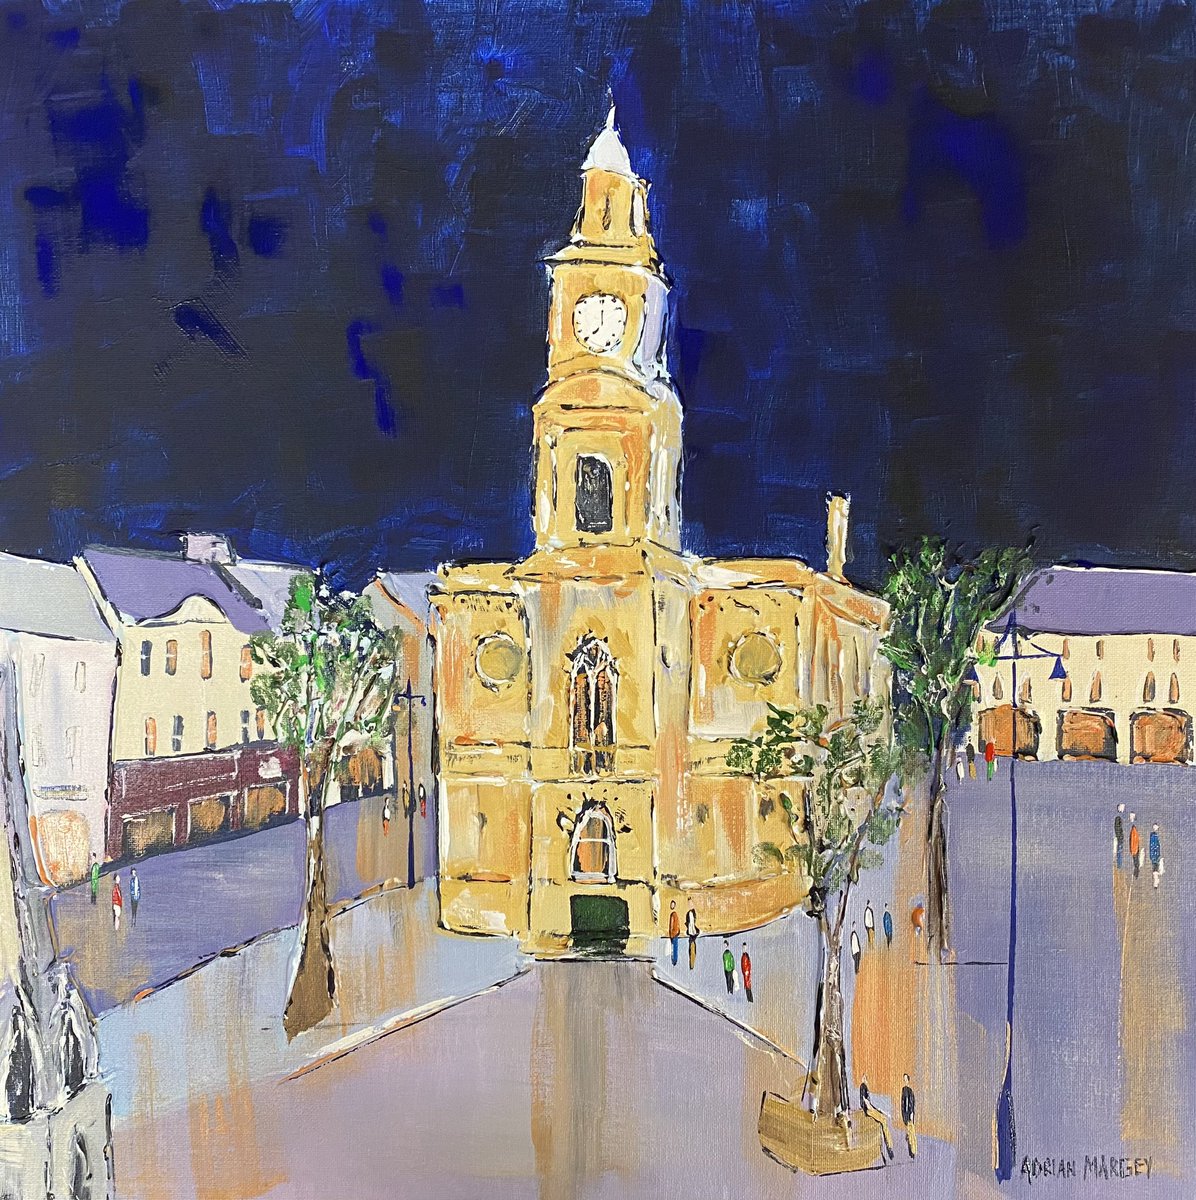 ‘#Coleraine Town Hall by Night’. Lucky 2b showcasing our work here nxt wkend. The Town Hall opened its doors in 1859. Designed in an Italianate style & built from golden sandstone, it’s the jewel in the crown of Coleraine’s main shopping area. #CommunitySpaces #VisitCauseway